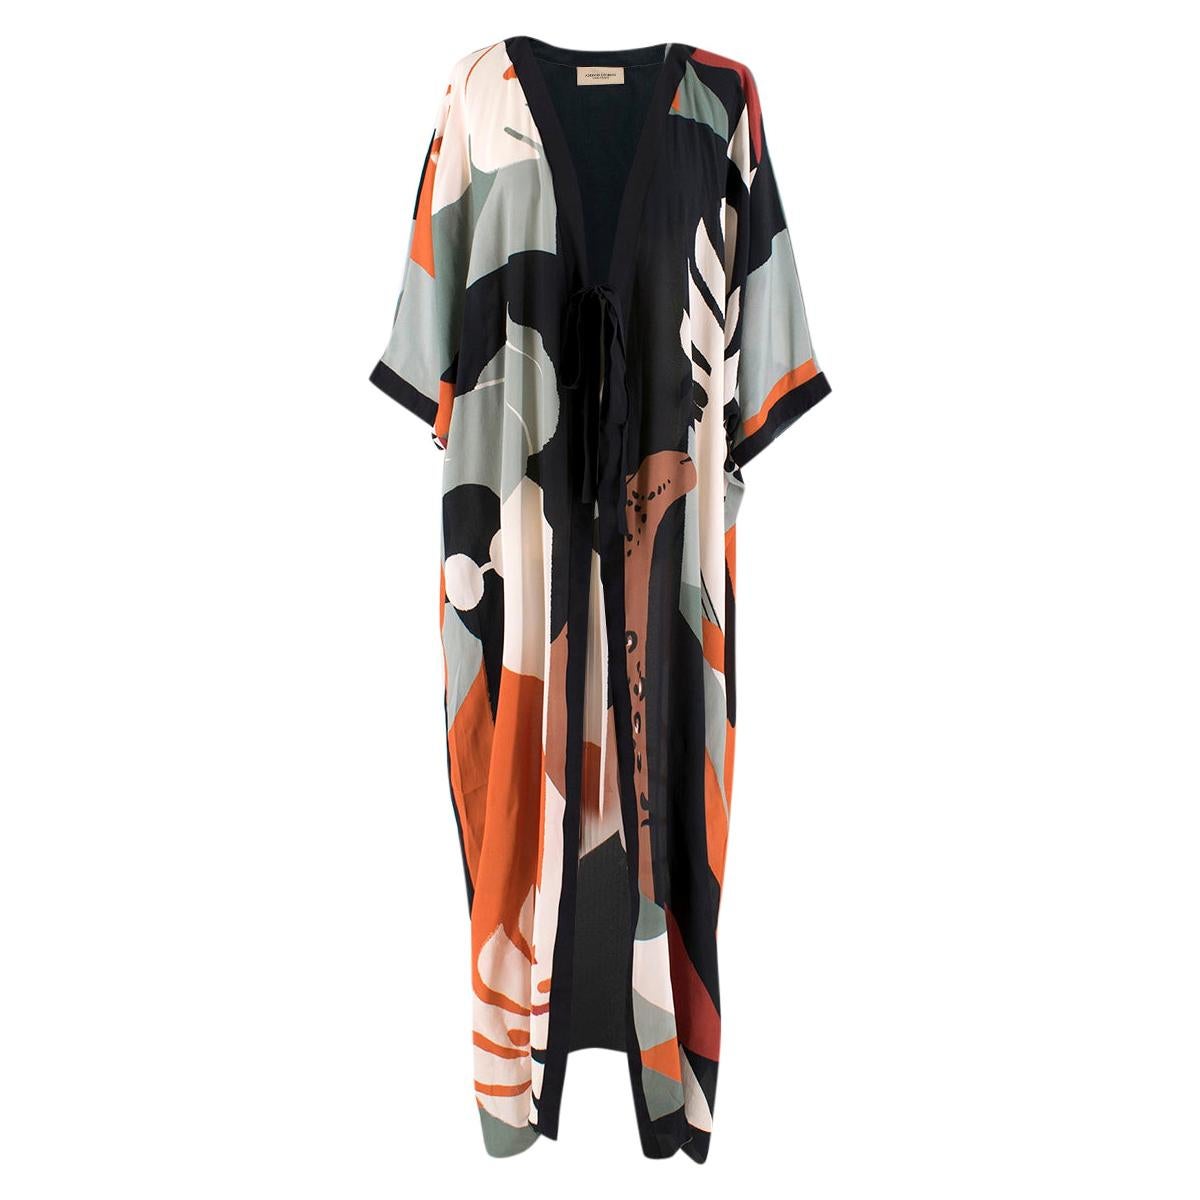 Adriana Degreas Multi-Print Silk Beach Tie Front Cover-up One Size